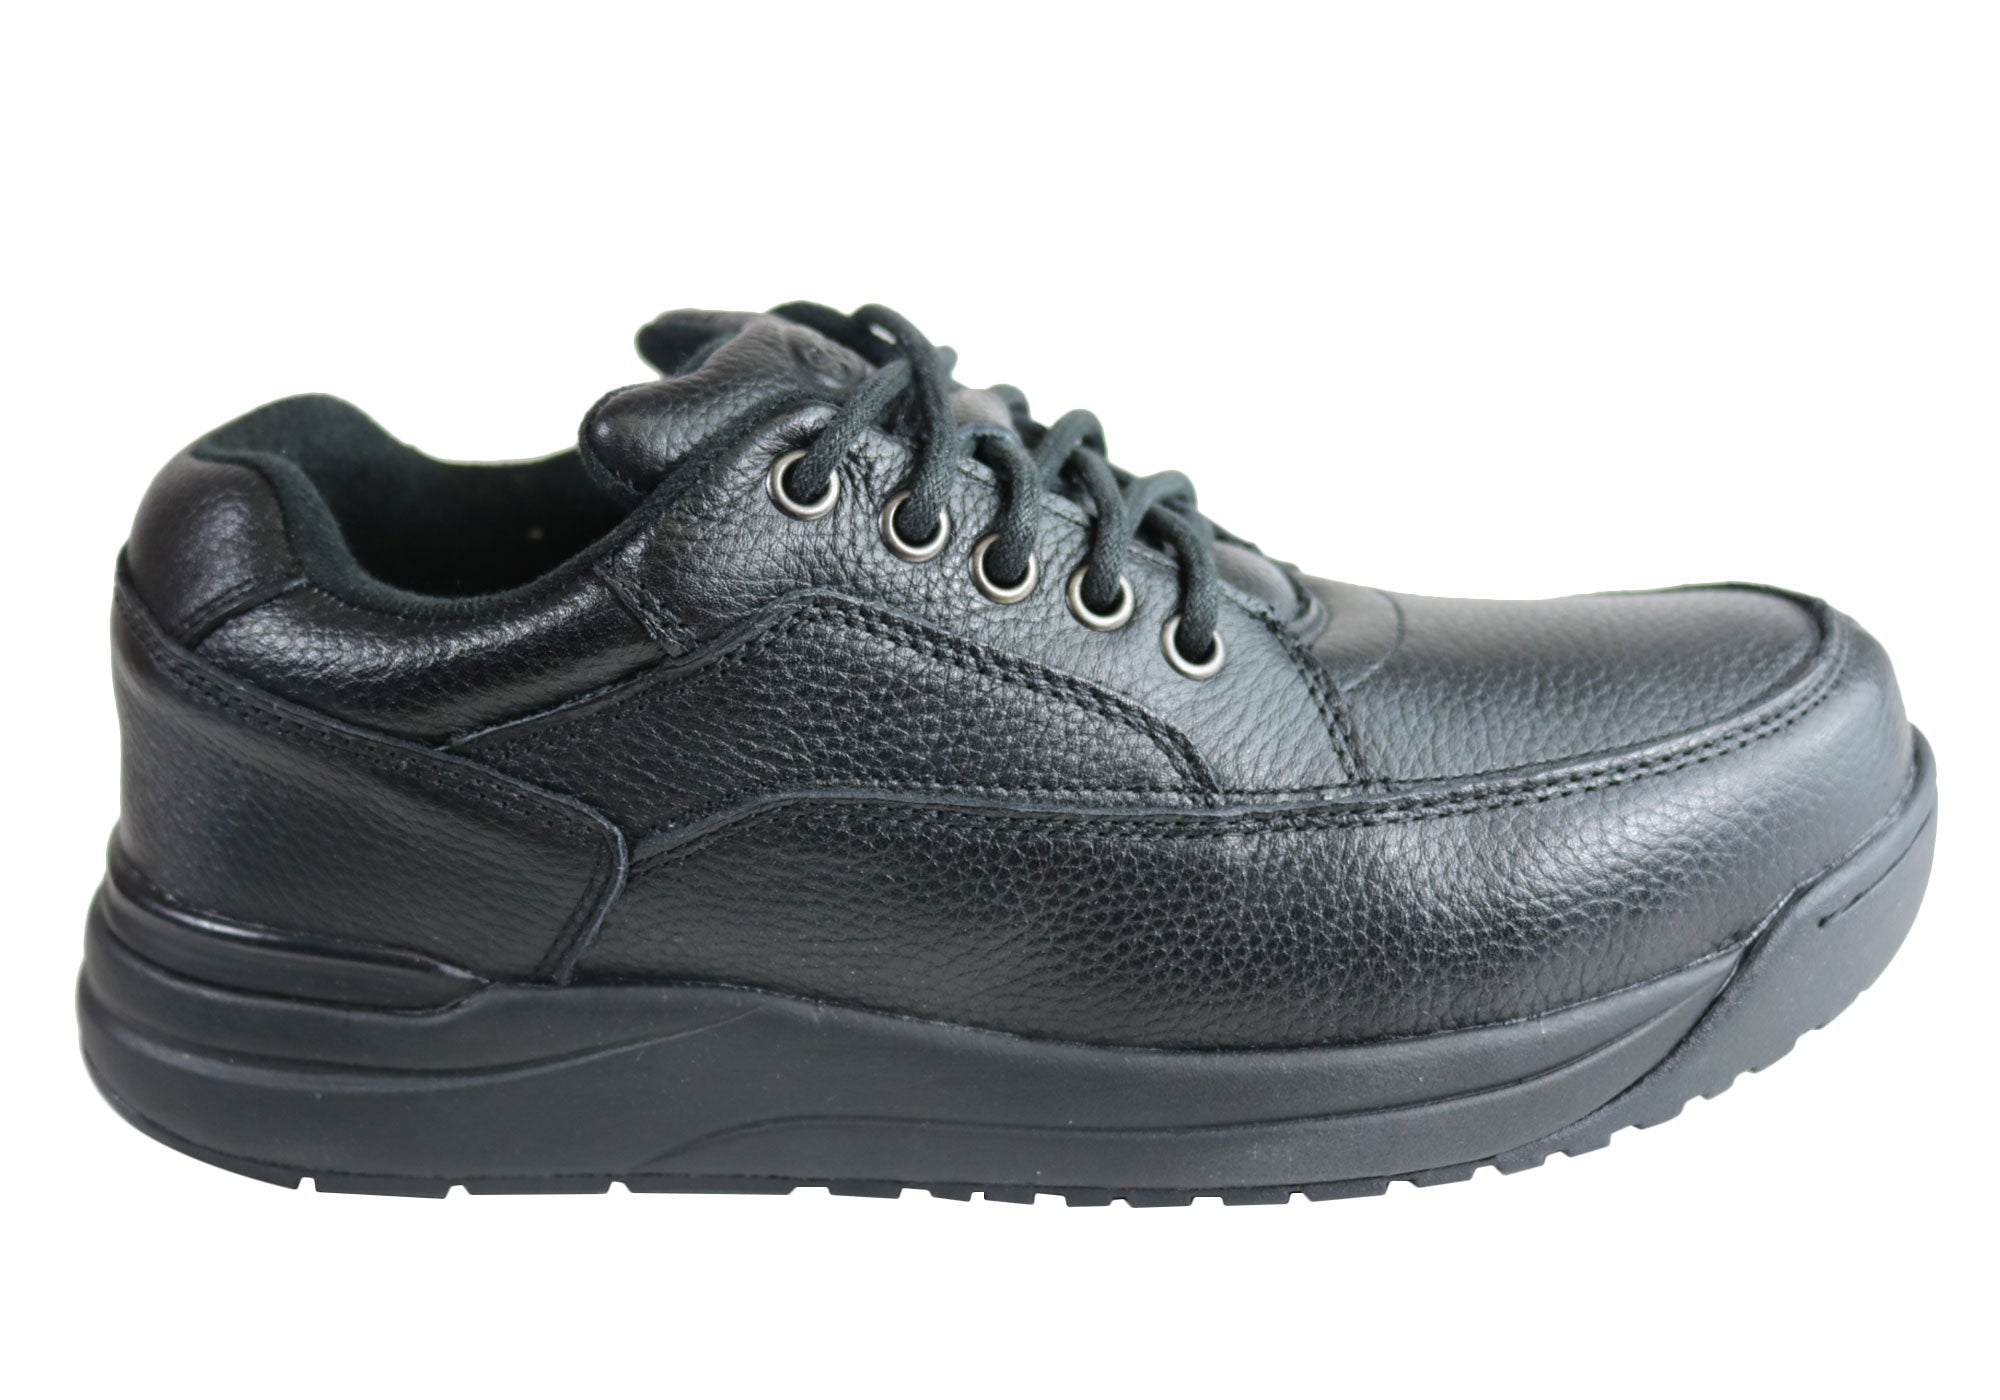 Scholl Orthaheel Power Walker Mens Comfortable Lace Up Walking Shoes ...